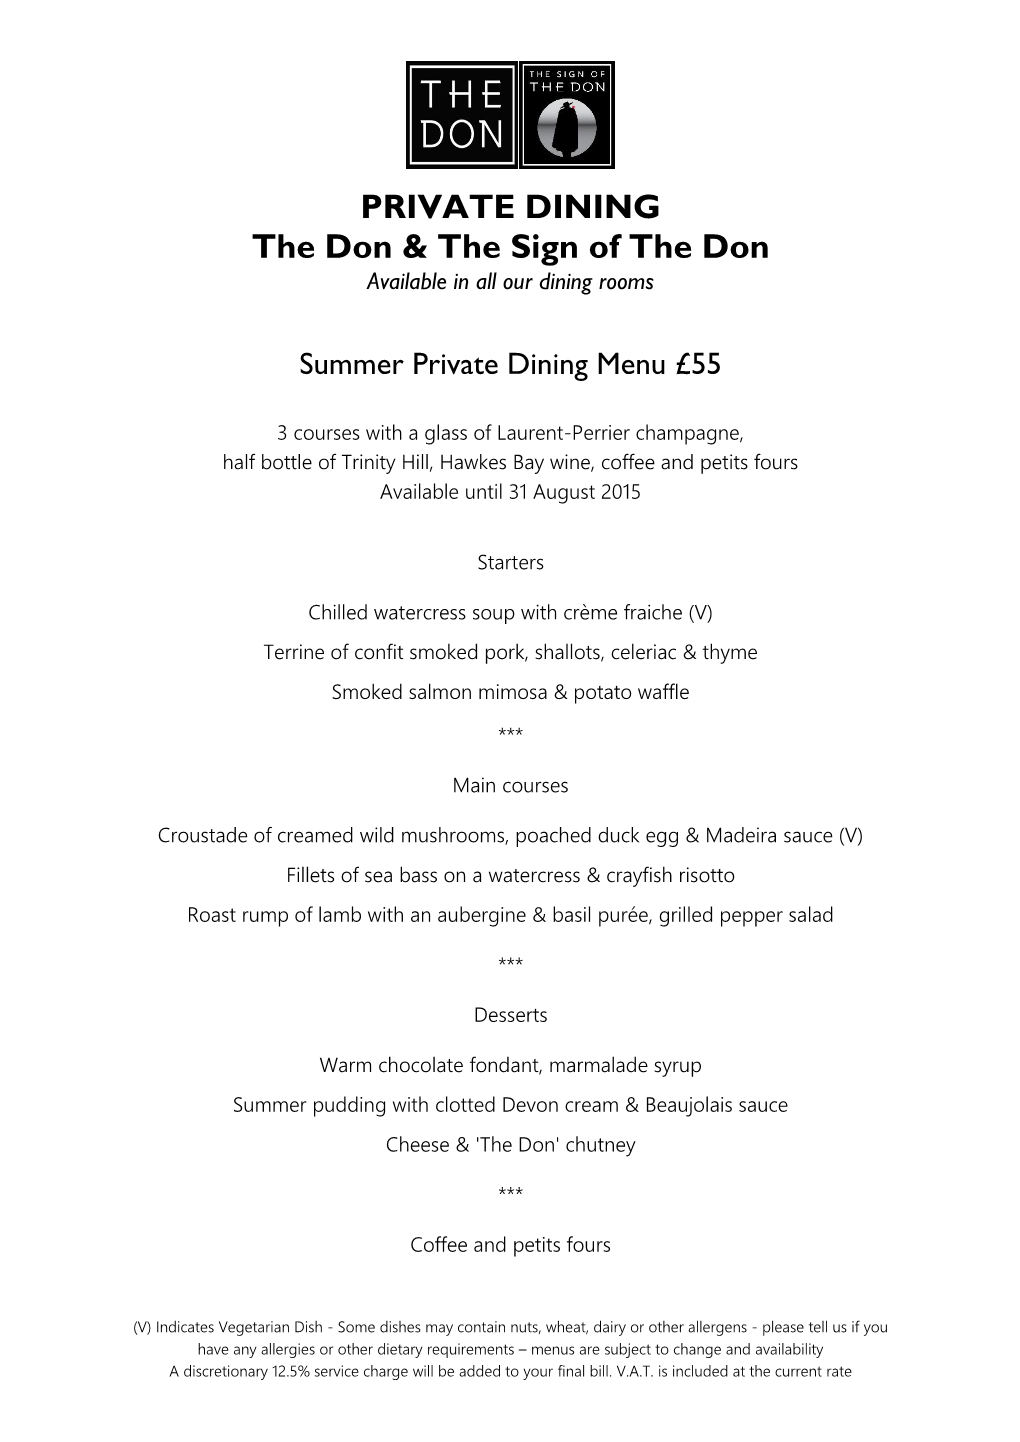 PRIVATE DINING the Don & the Sign of The